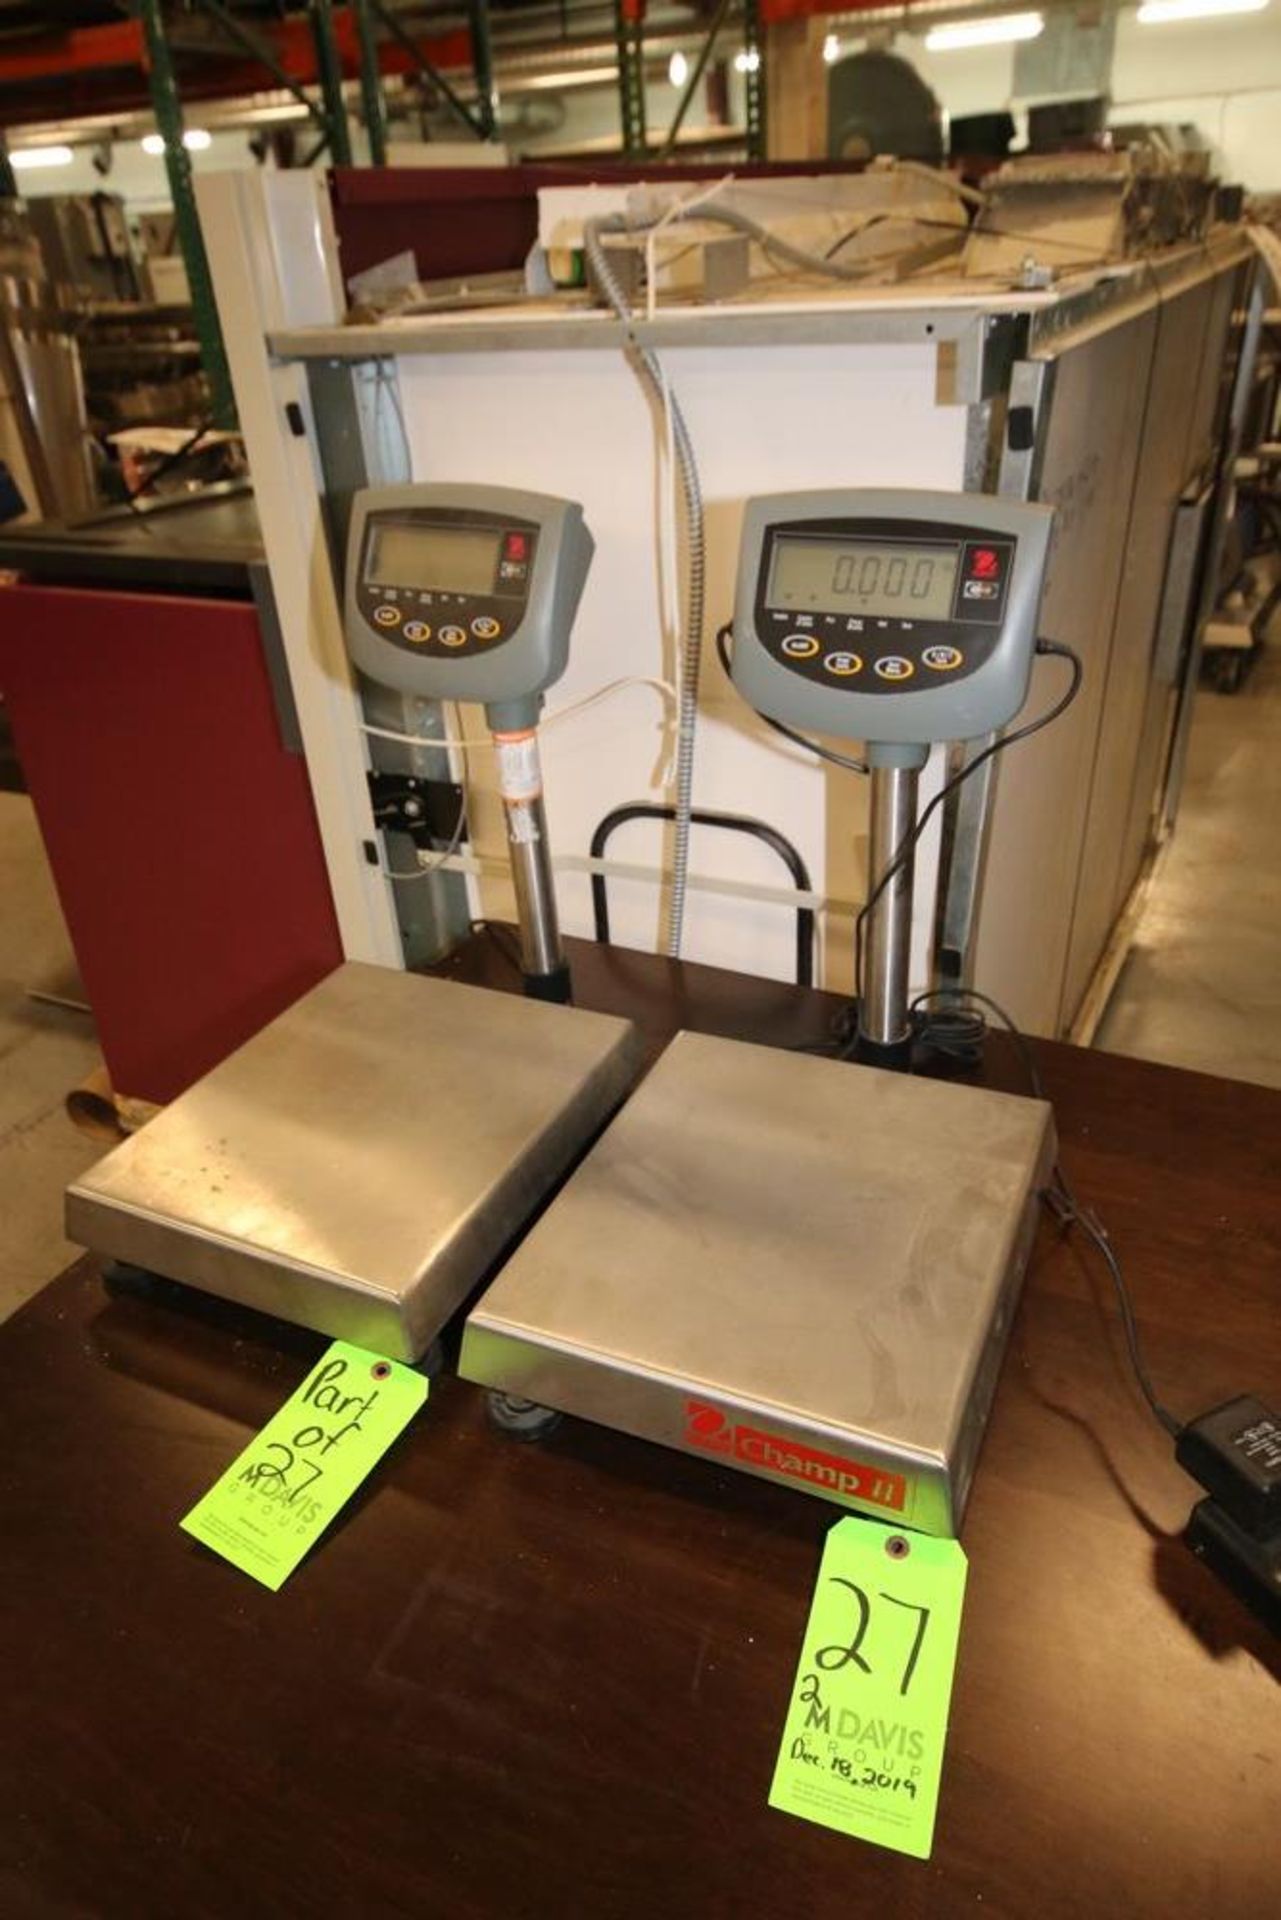 Ohaus S/S Digital Platform Scales, M/N CD-11, with Aprox. 14" L x 12" W S/S Platforms, with